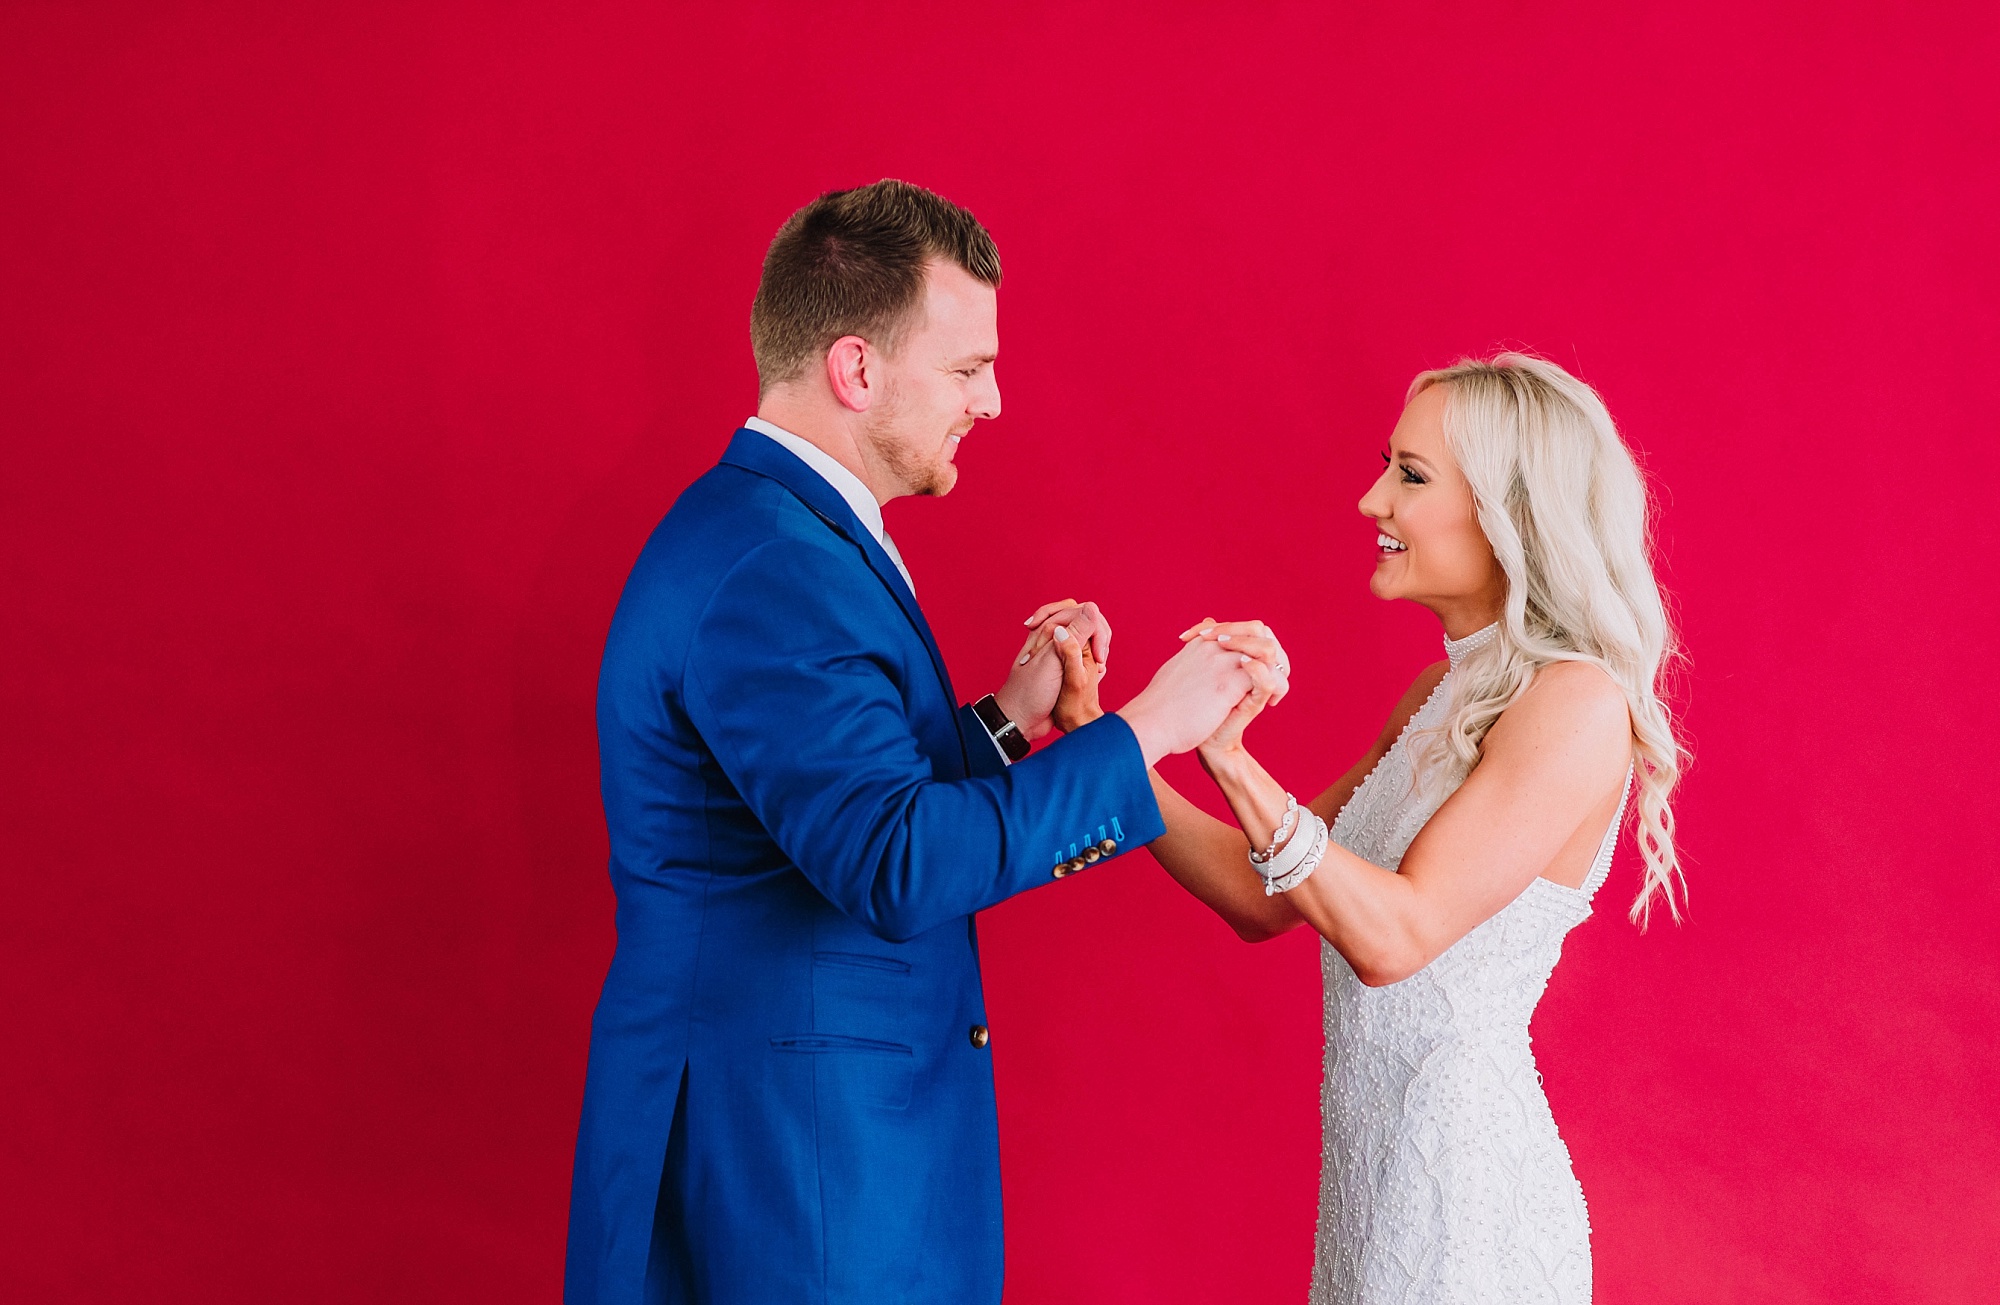 wedding-couple-indoor-studio-trendy-photography-colorful-and-bright